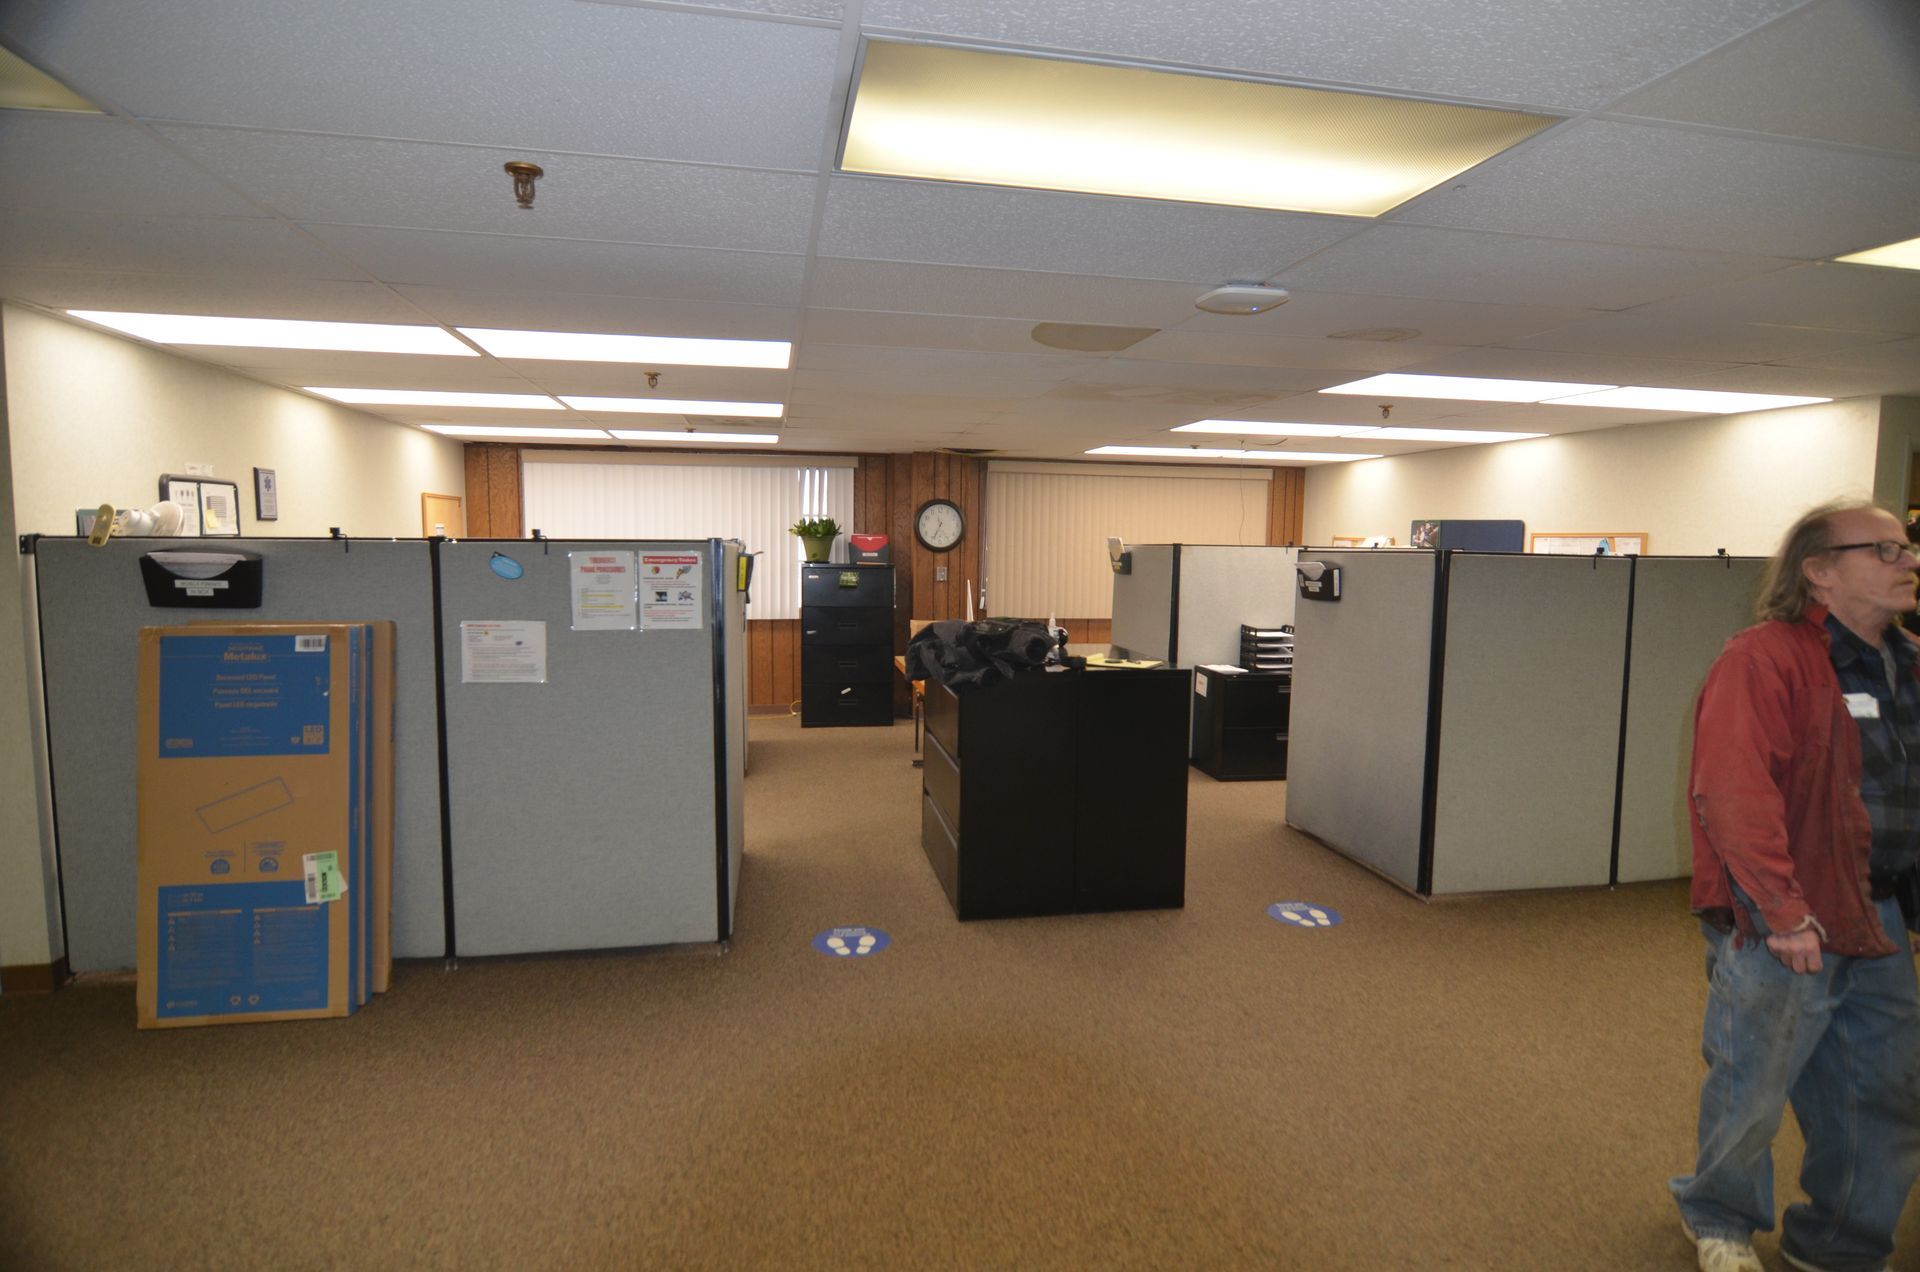 An empty office with cubicles and a cardboard box on the floor